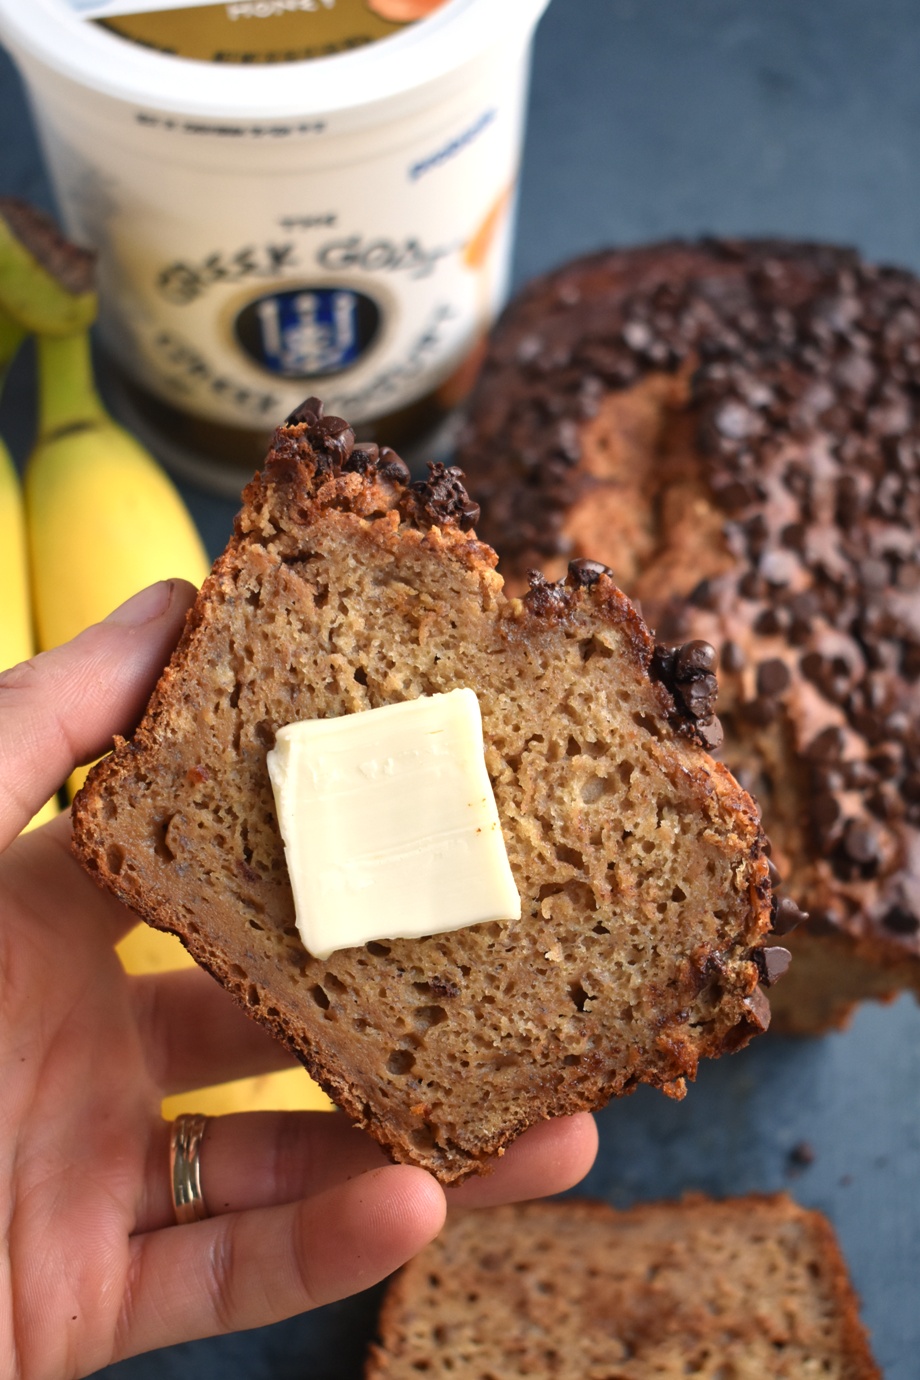 Slice of banana bread with butter